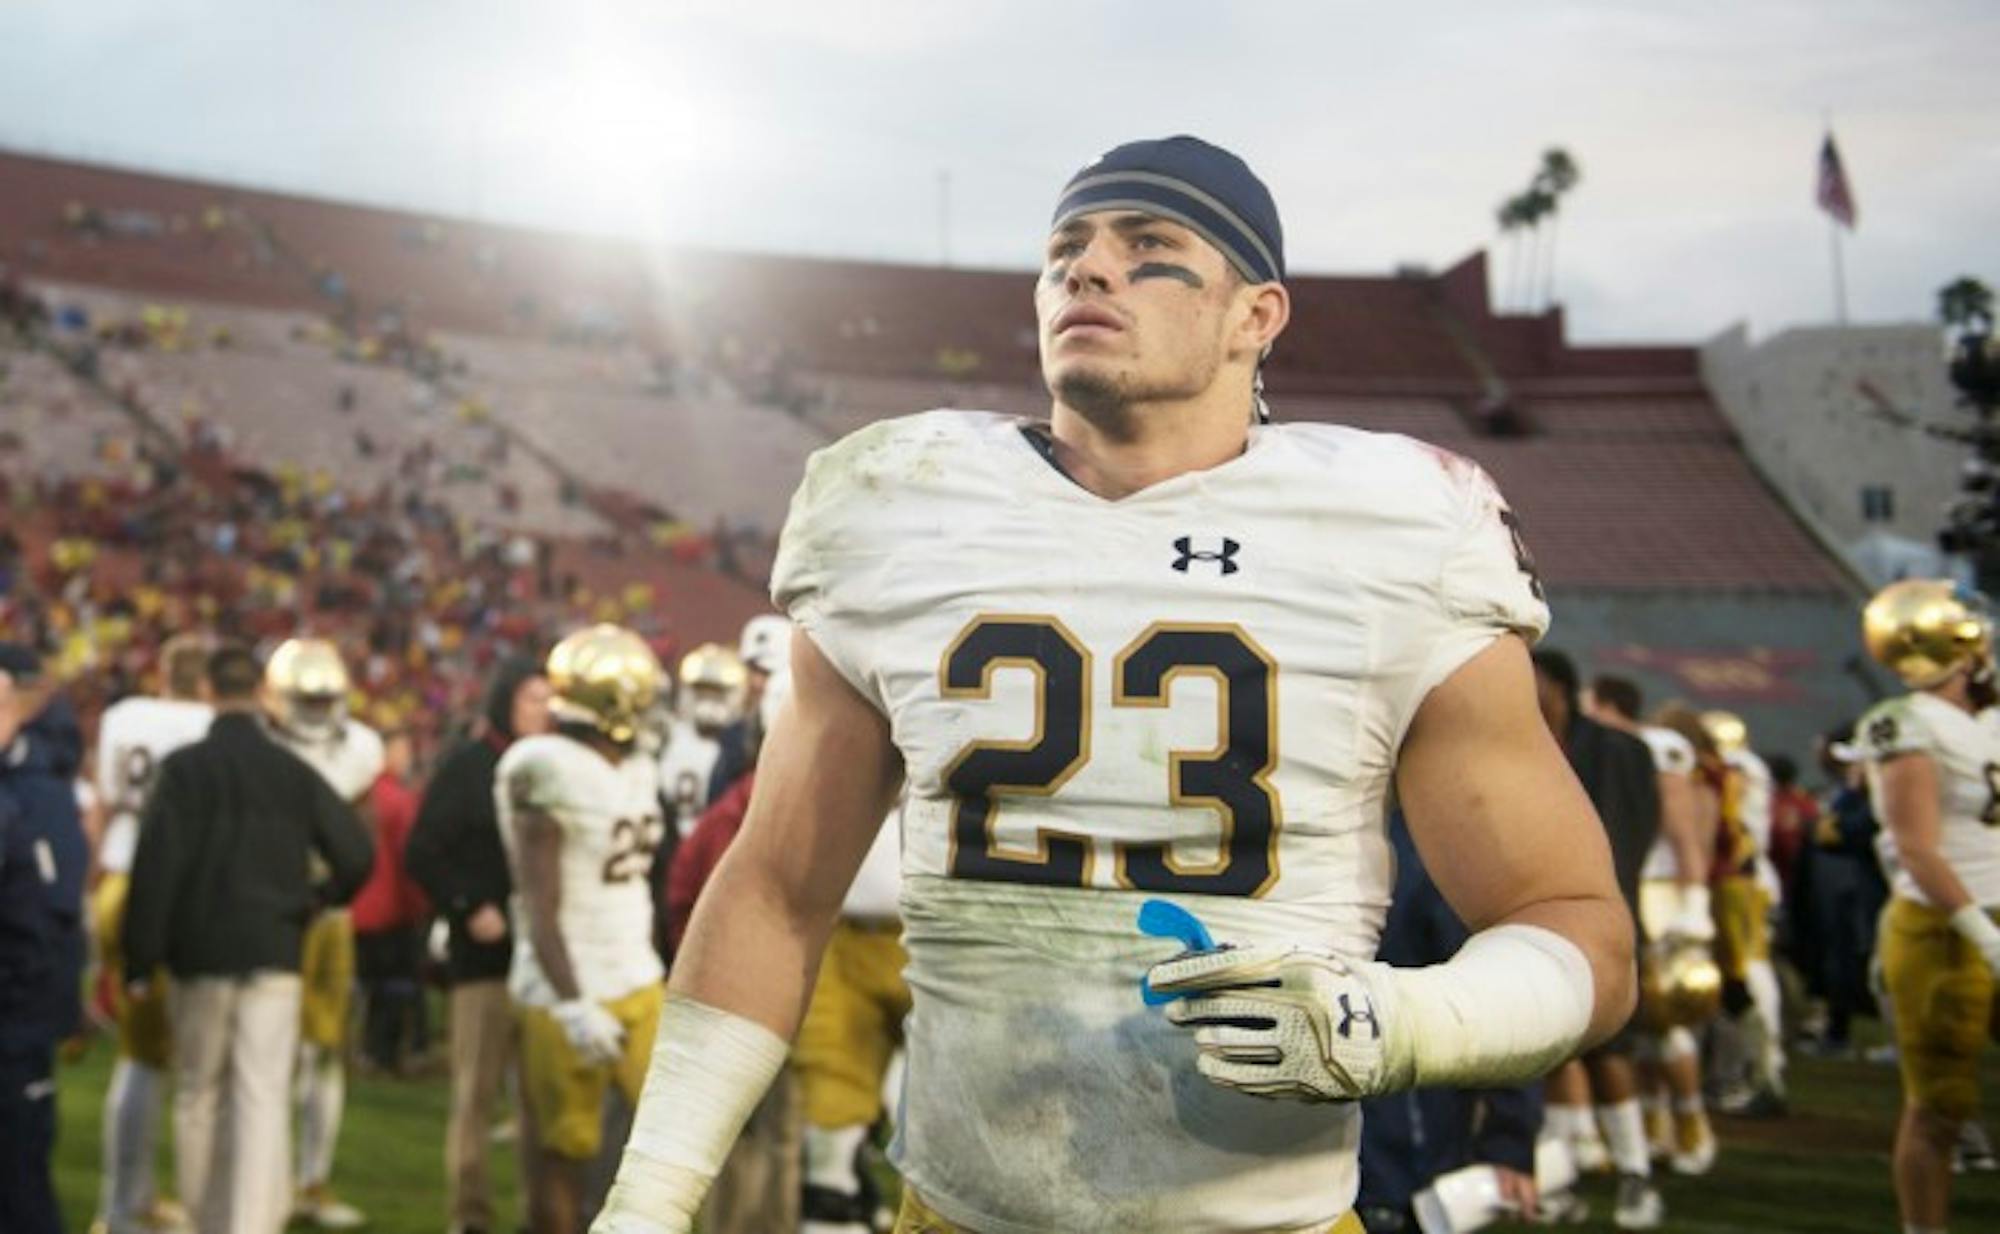 Irish senior safety Drue Tranquill leaves the field after Notre Dame's 45-27 loss to USC on Nov. 26.